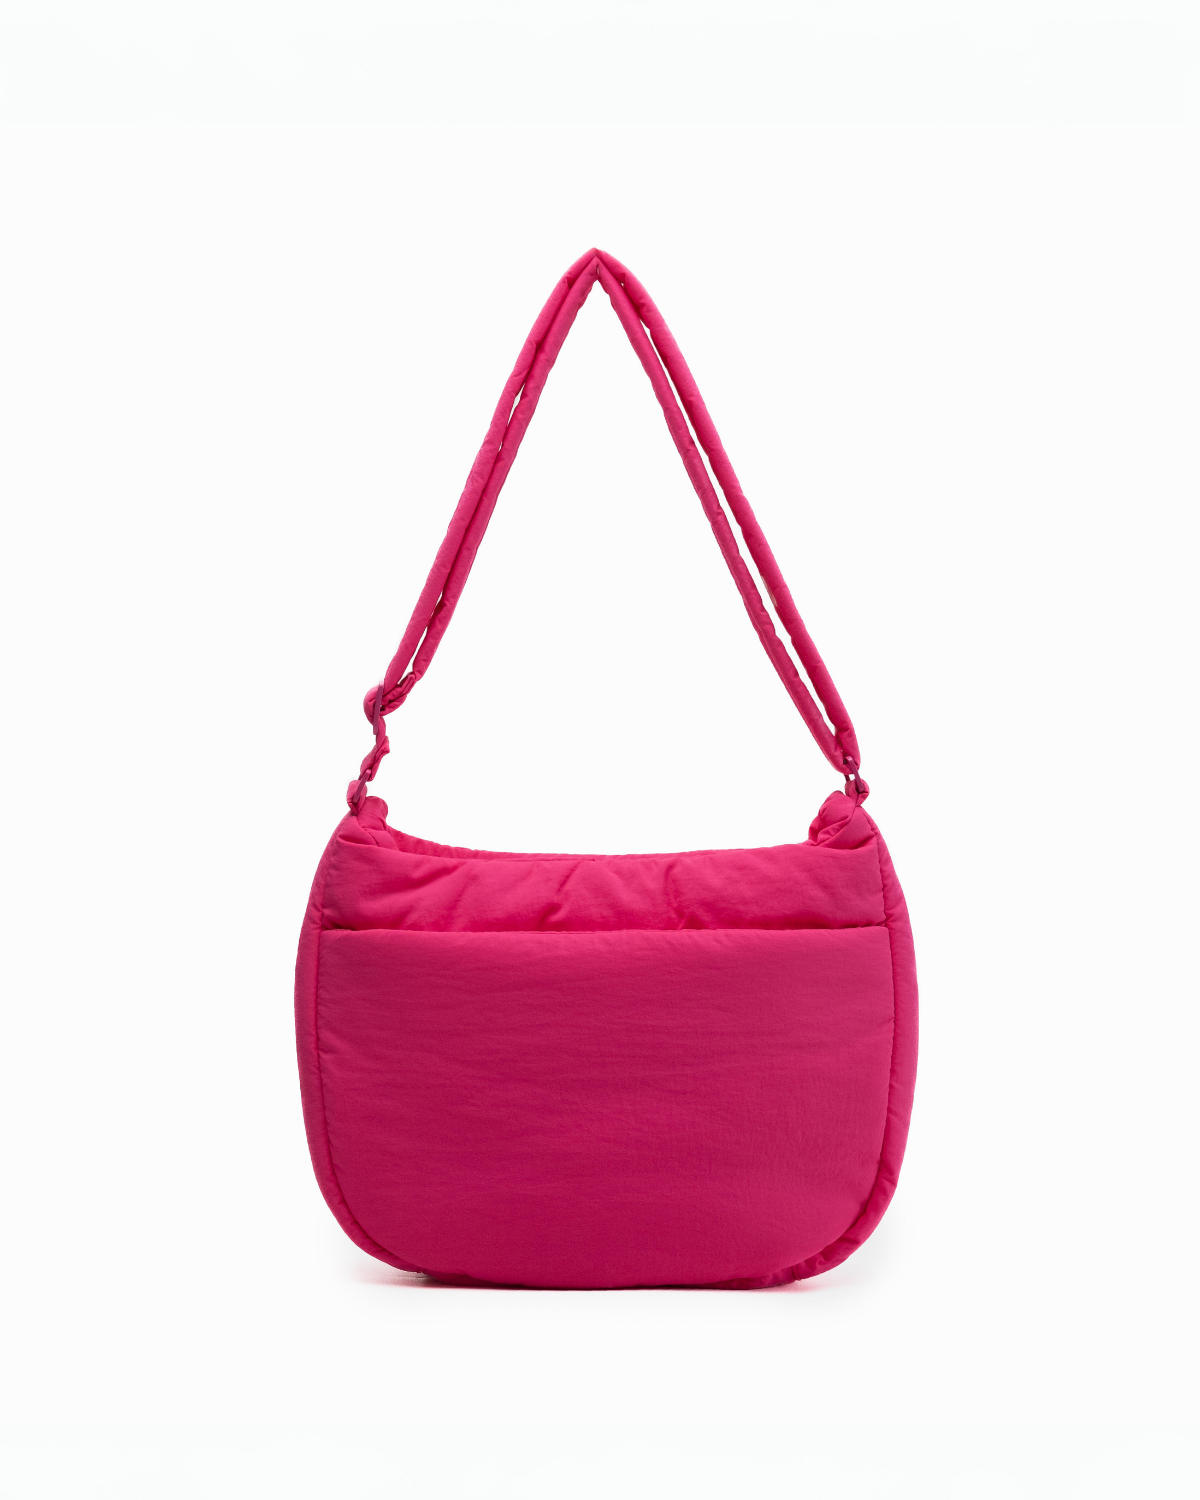 COSY PUFFY CROSSBODY BAG IN CANDY